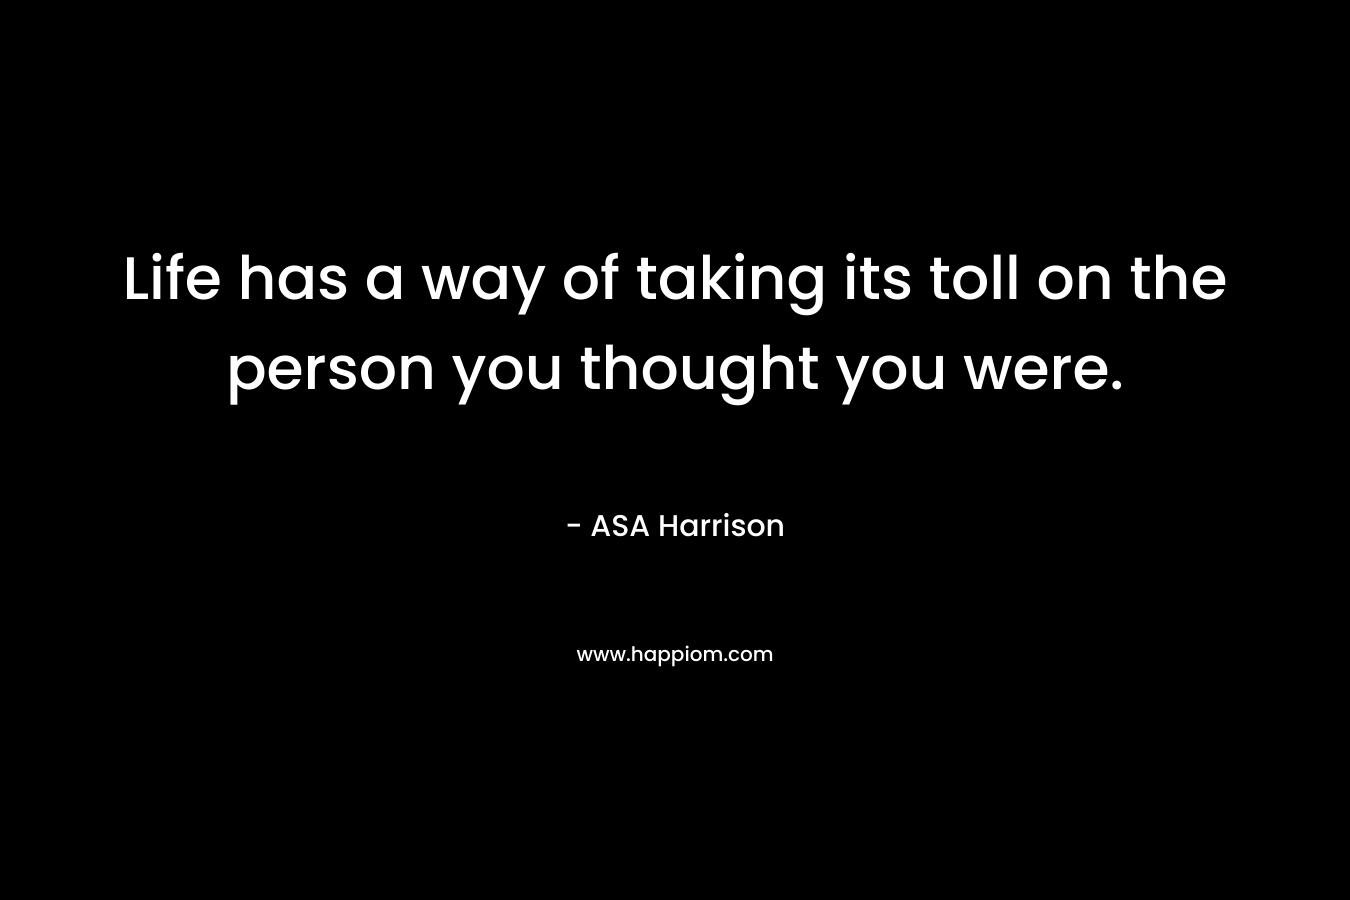 Life has a way of taking its toll on the person you thought you were. – ASA Harrison